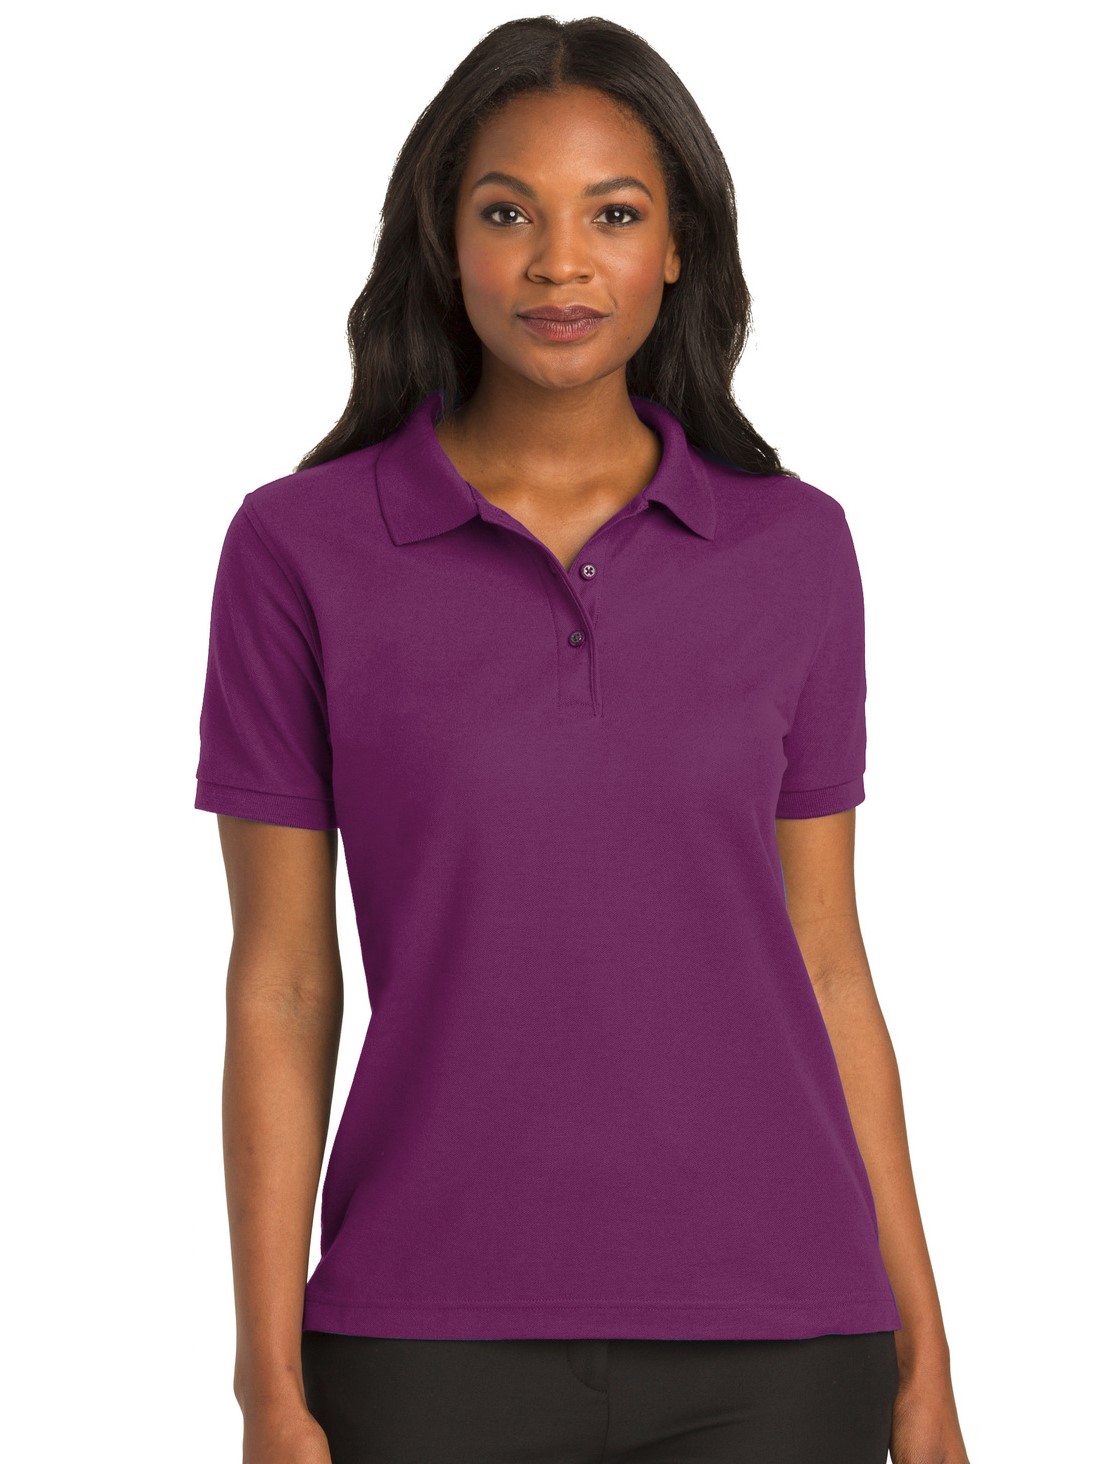 L500 Ladies' Port Authority Silk Touch Polo